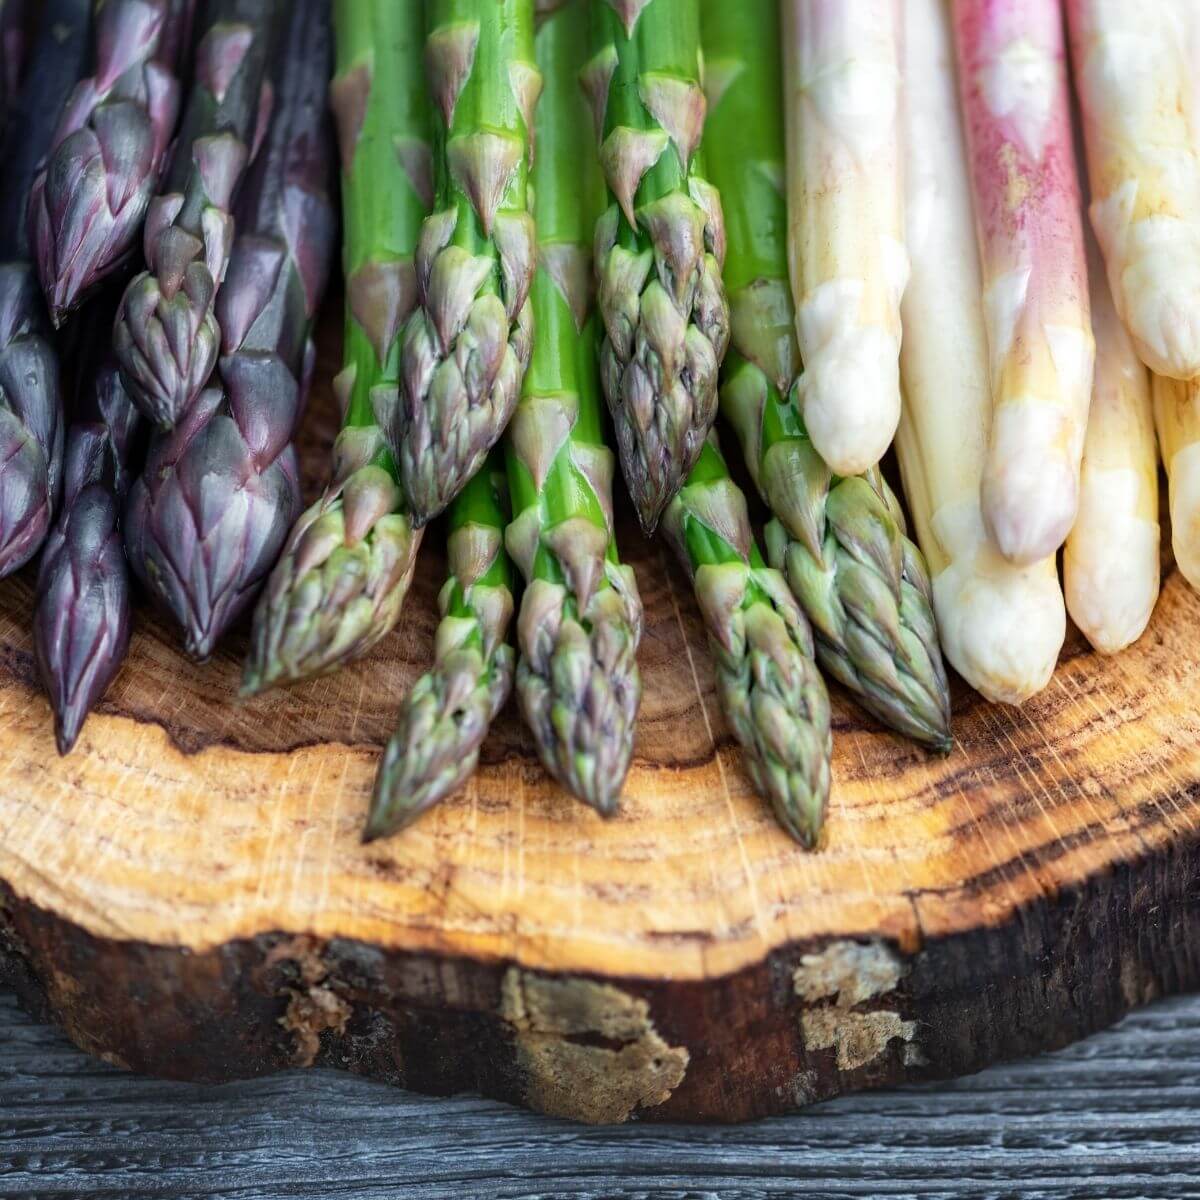 purple green and white asparagus on wooden platter